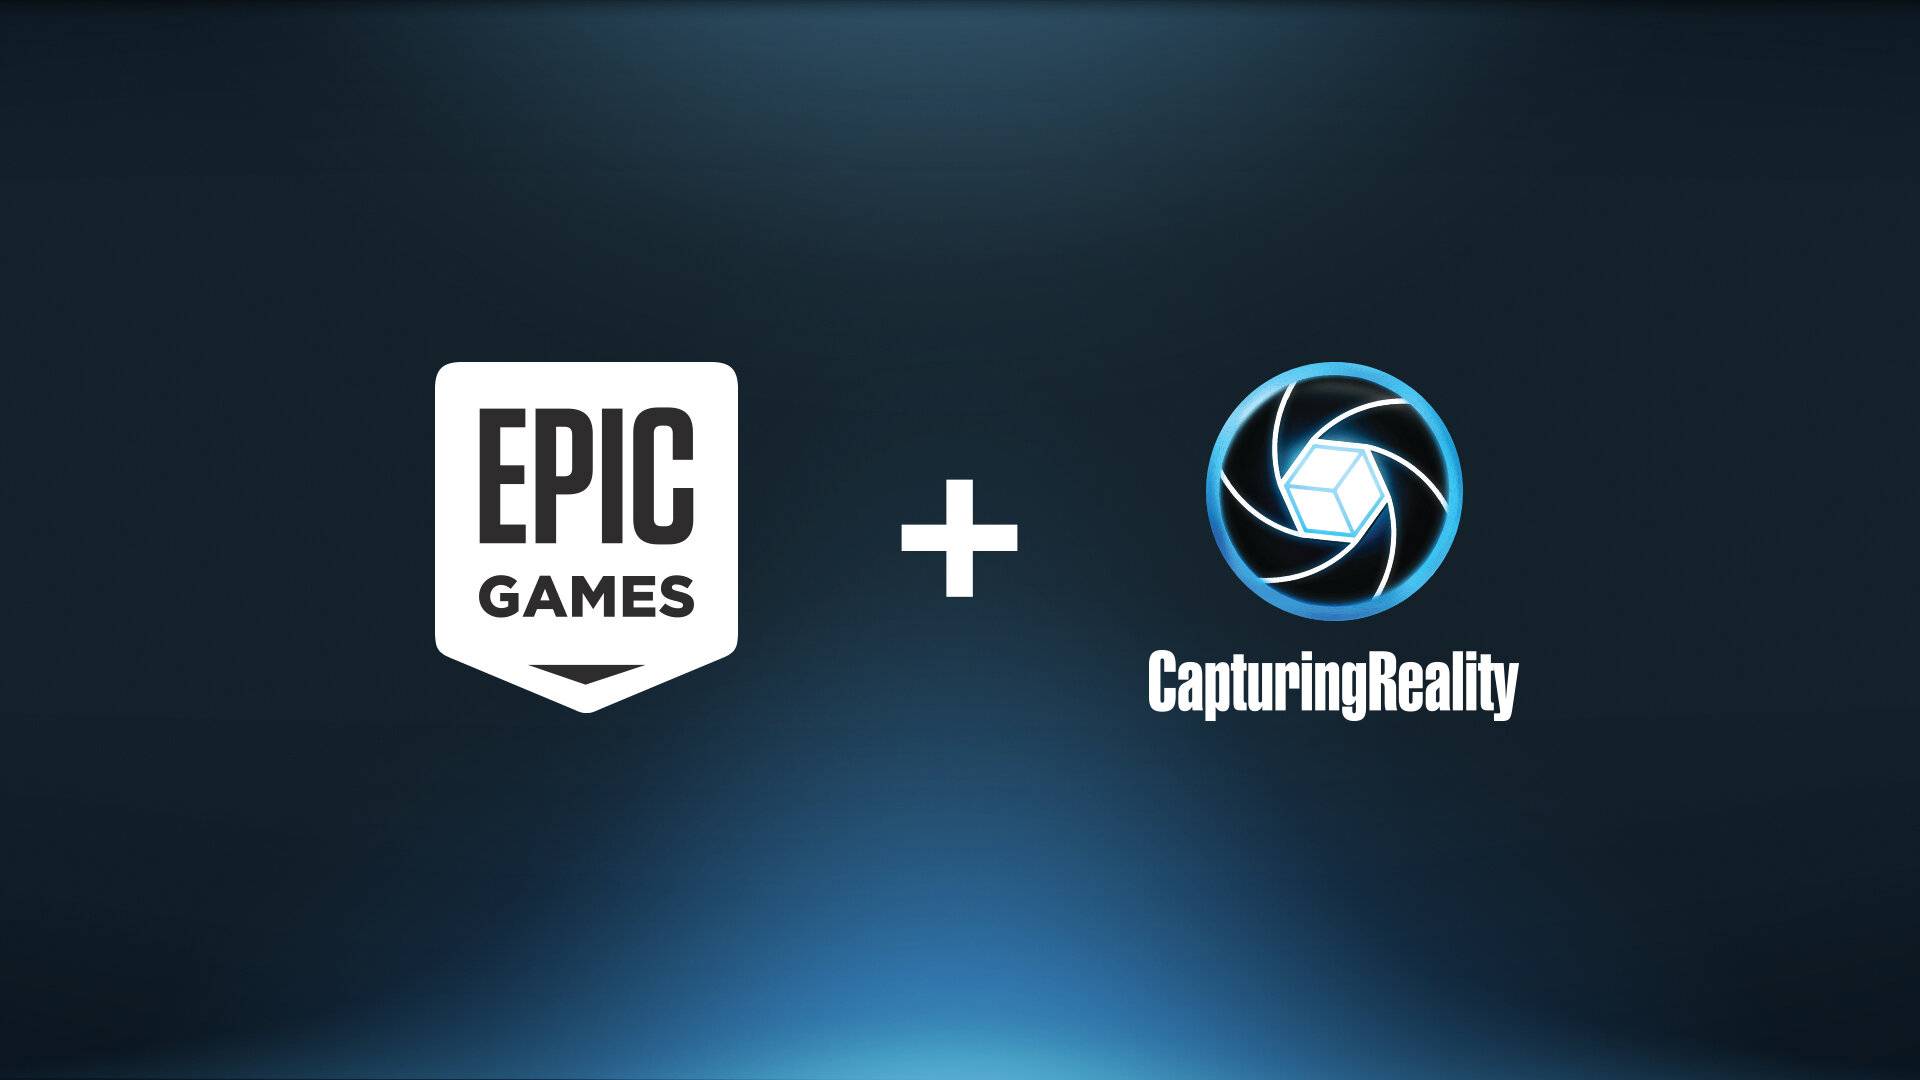 Epic Games and CaptuirngReality